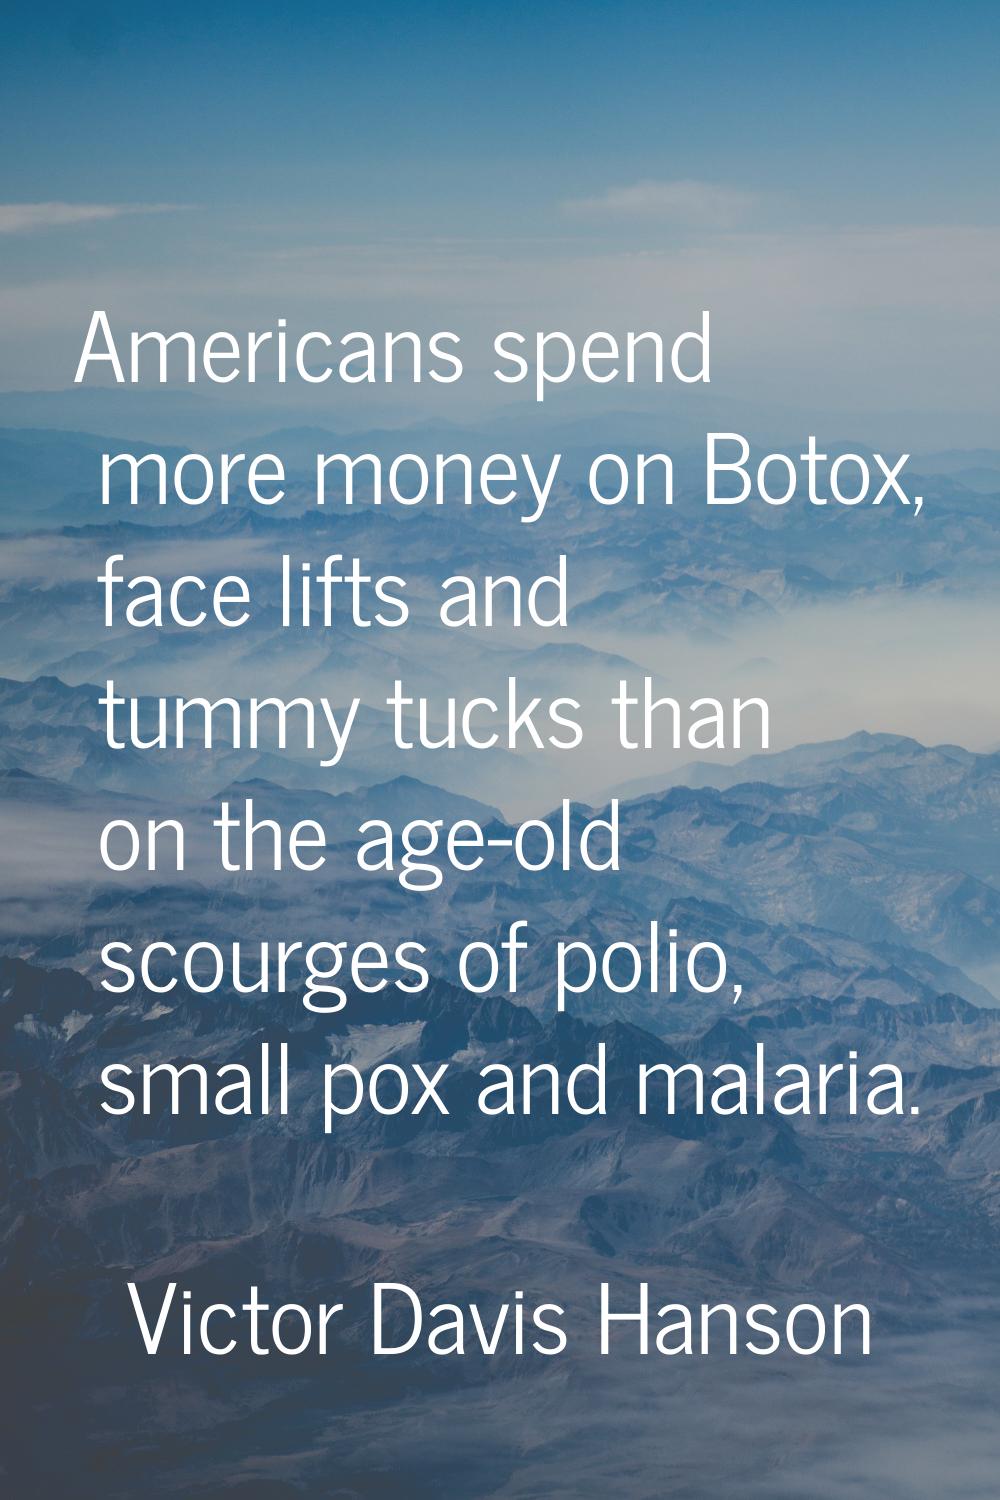 Americans spend more money on Botox, face lifts and tummy tucks than on the age-old scourges of pol